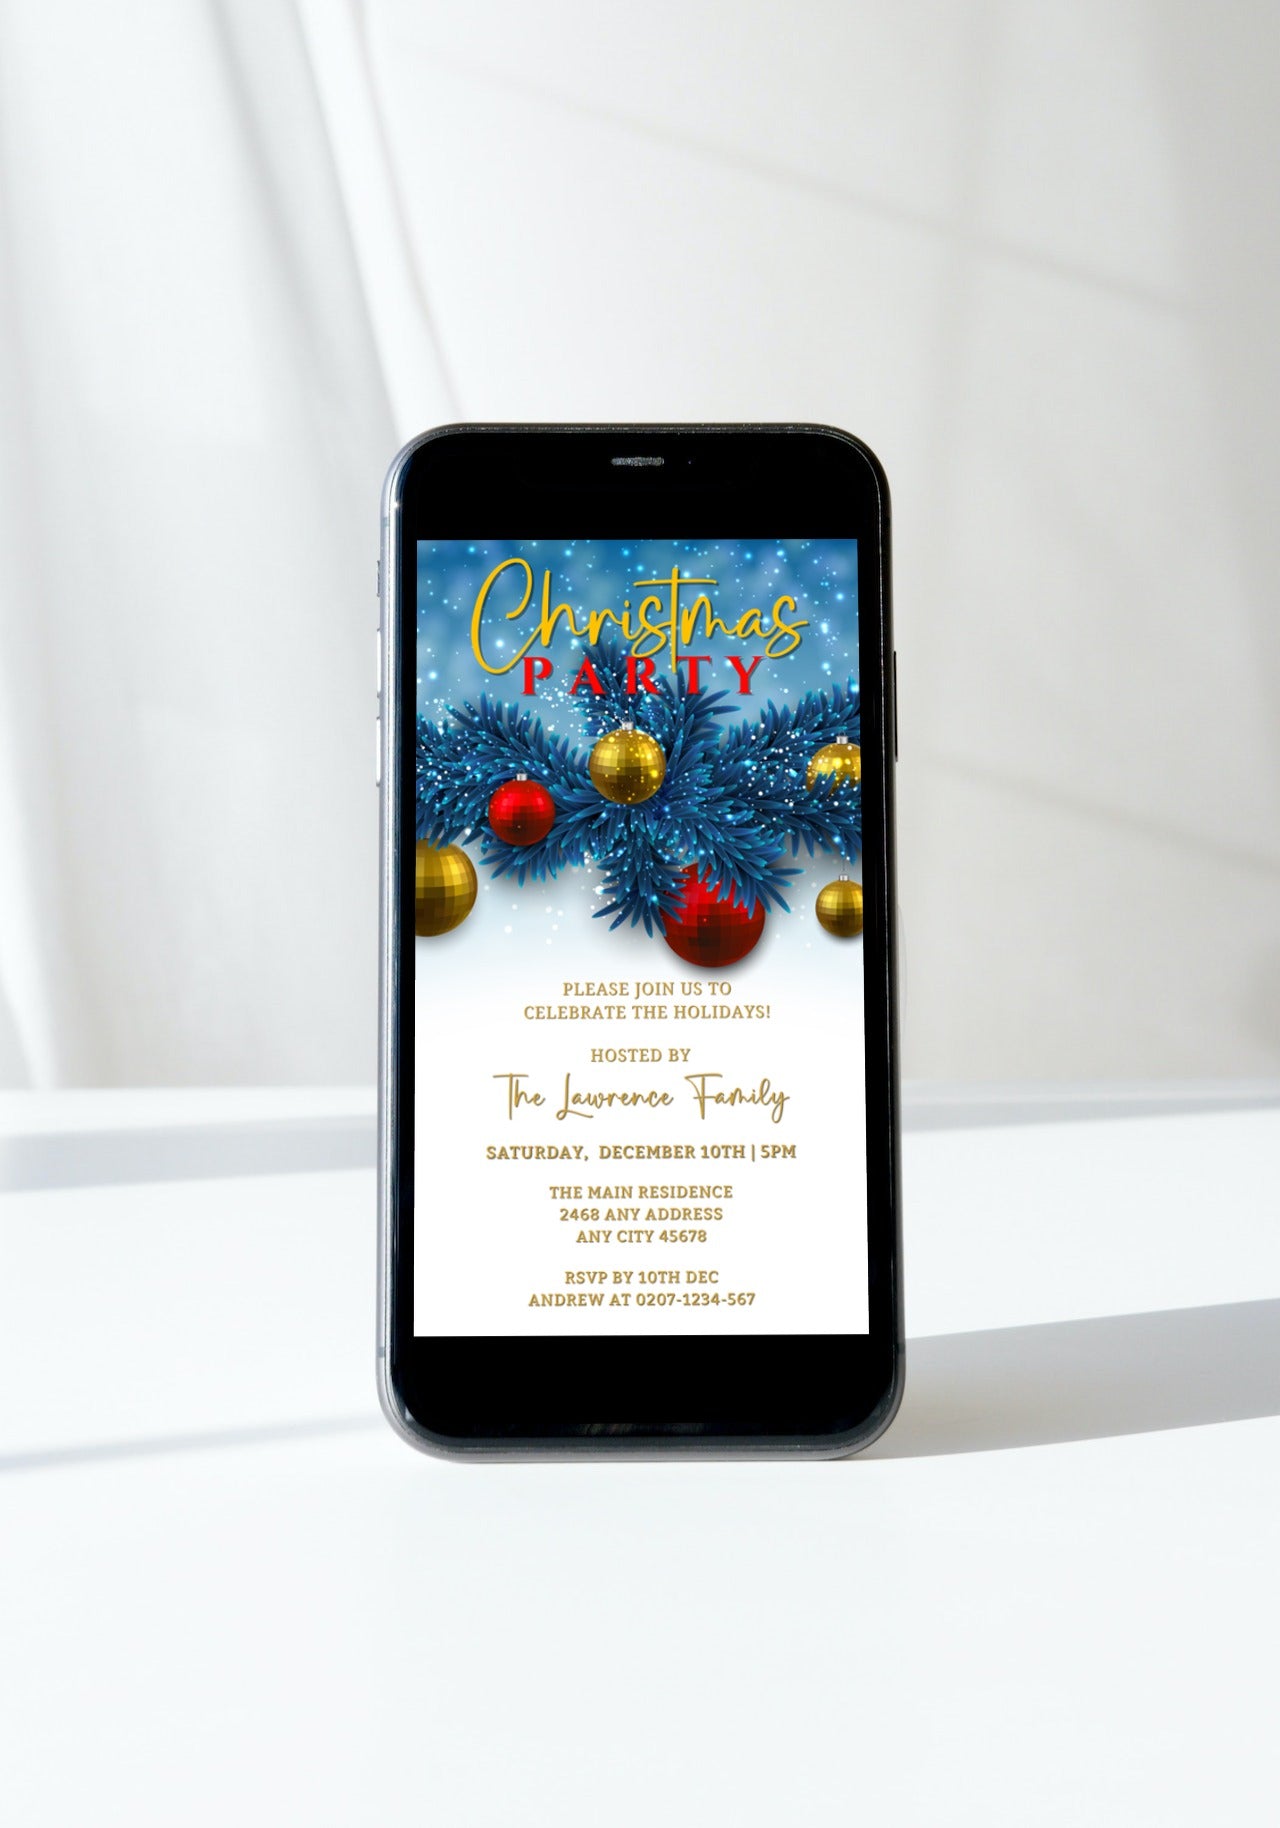 Editable Digital Blue Gold Red Ornaments | Christmas Party Invitation displayed on a smartphone screen, featuring festive ornaments and customizable text for personalizing event details.